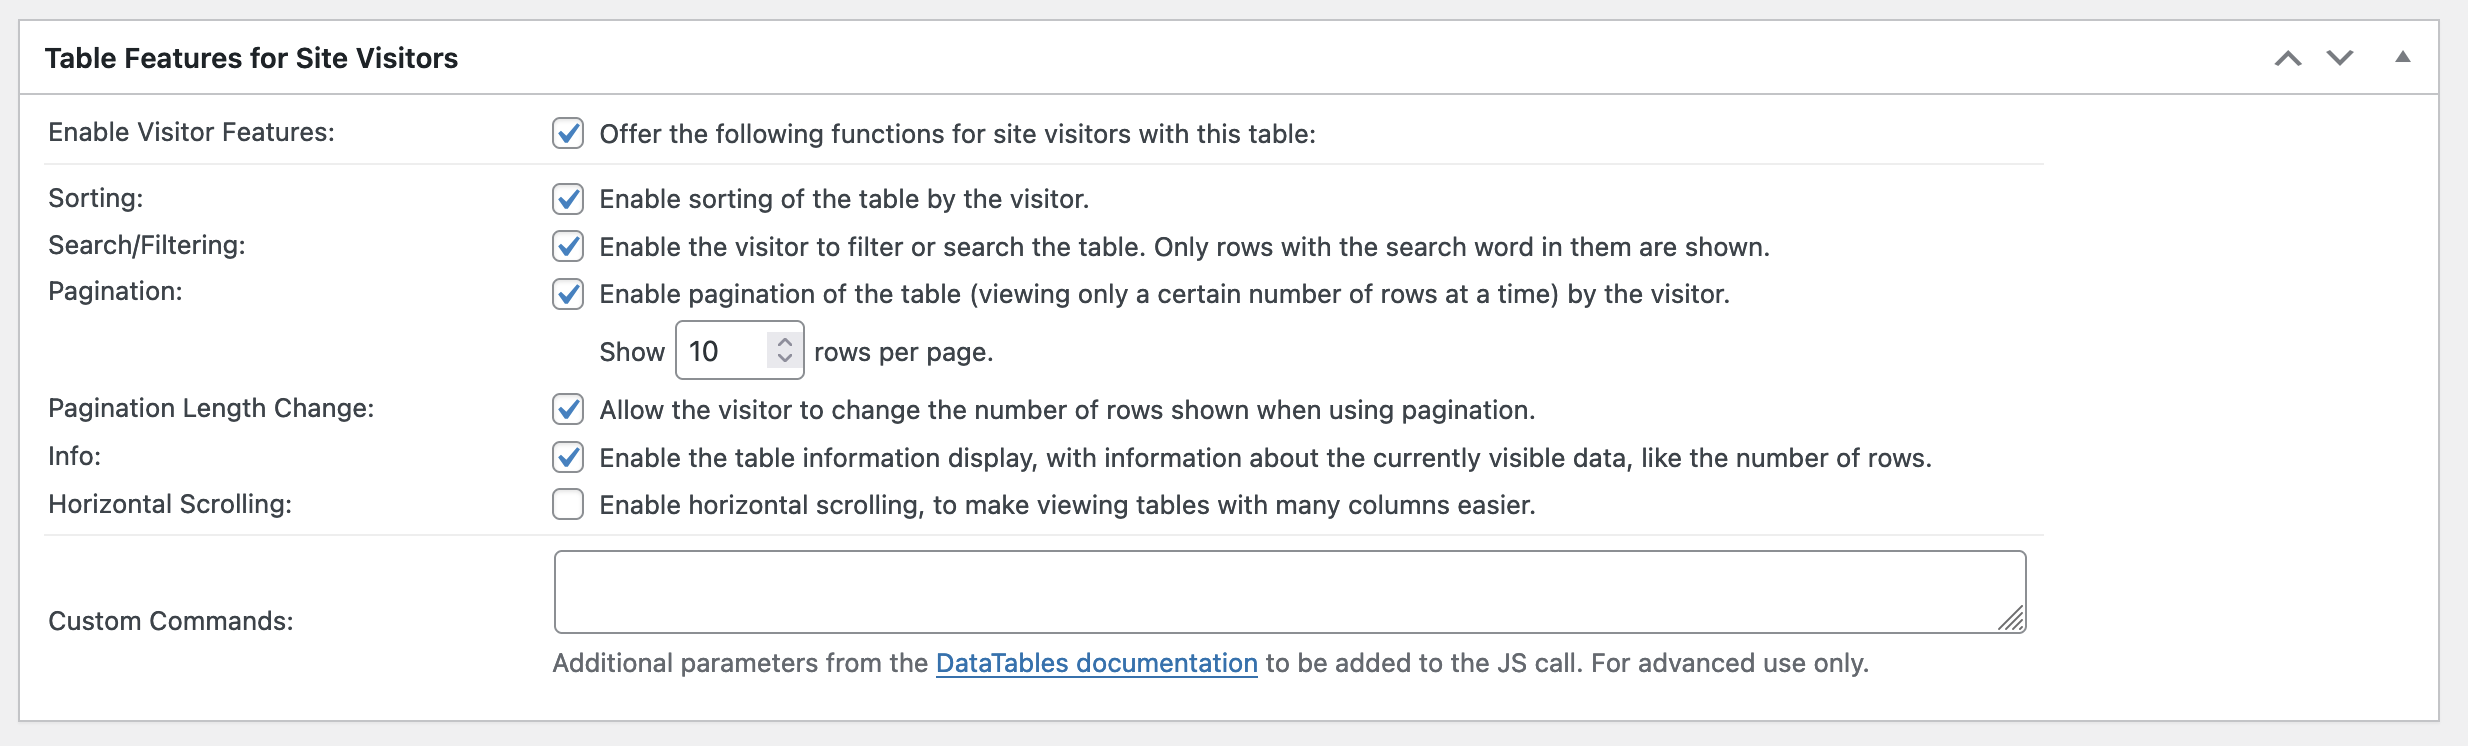 Table Features for Site Visitors.